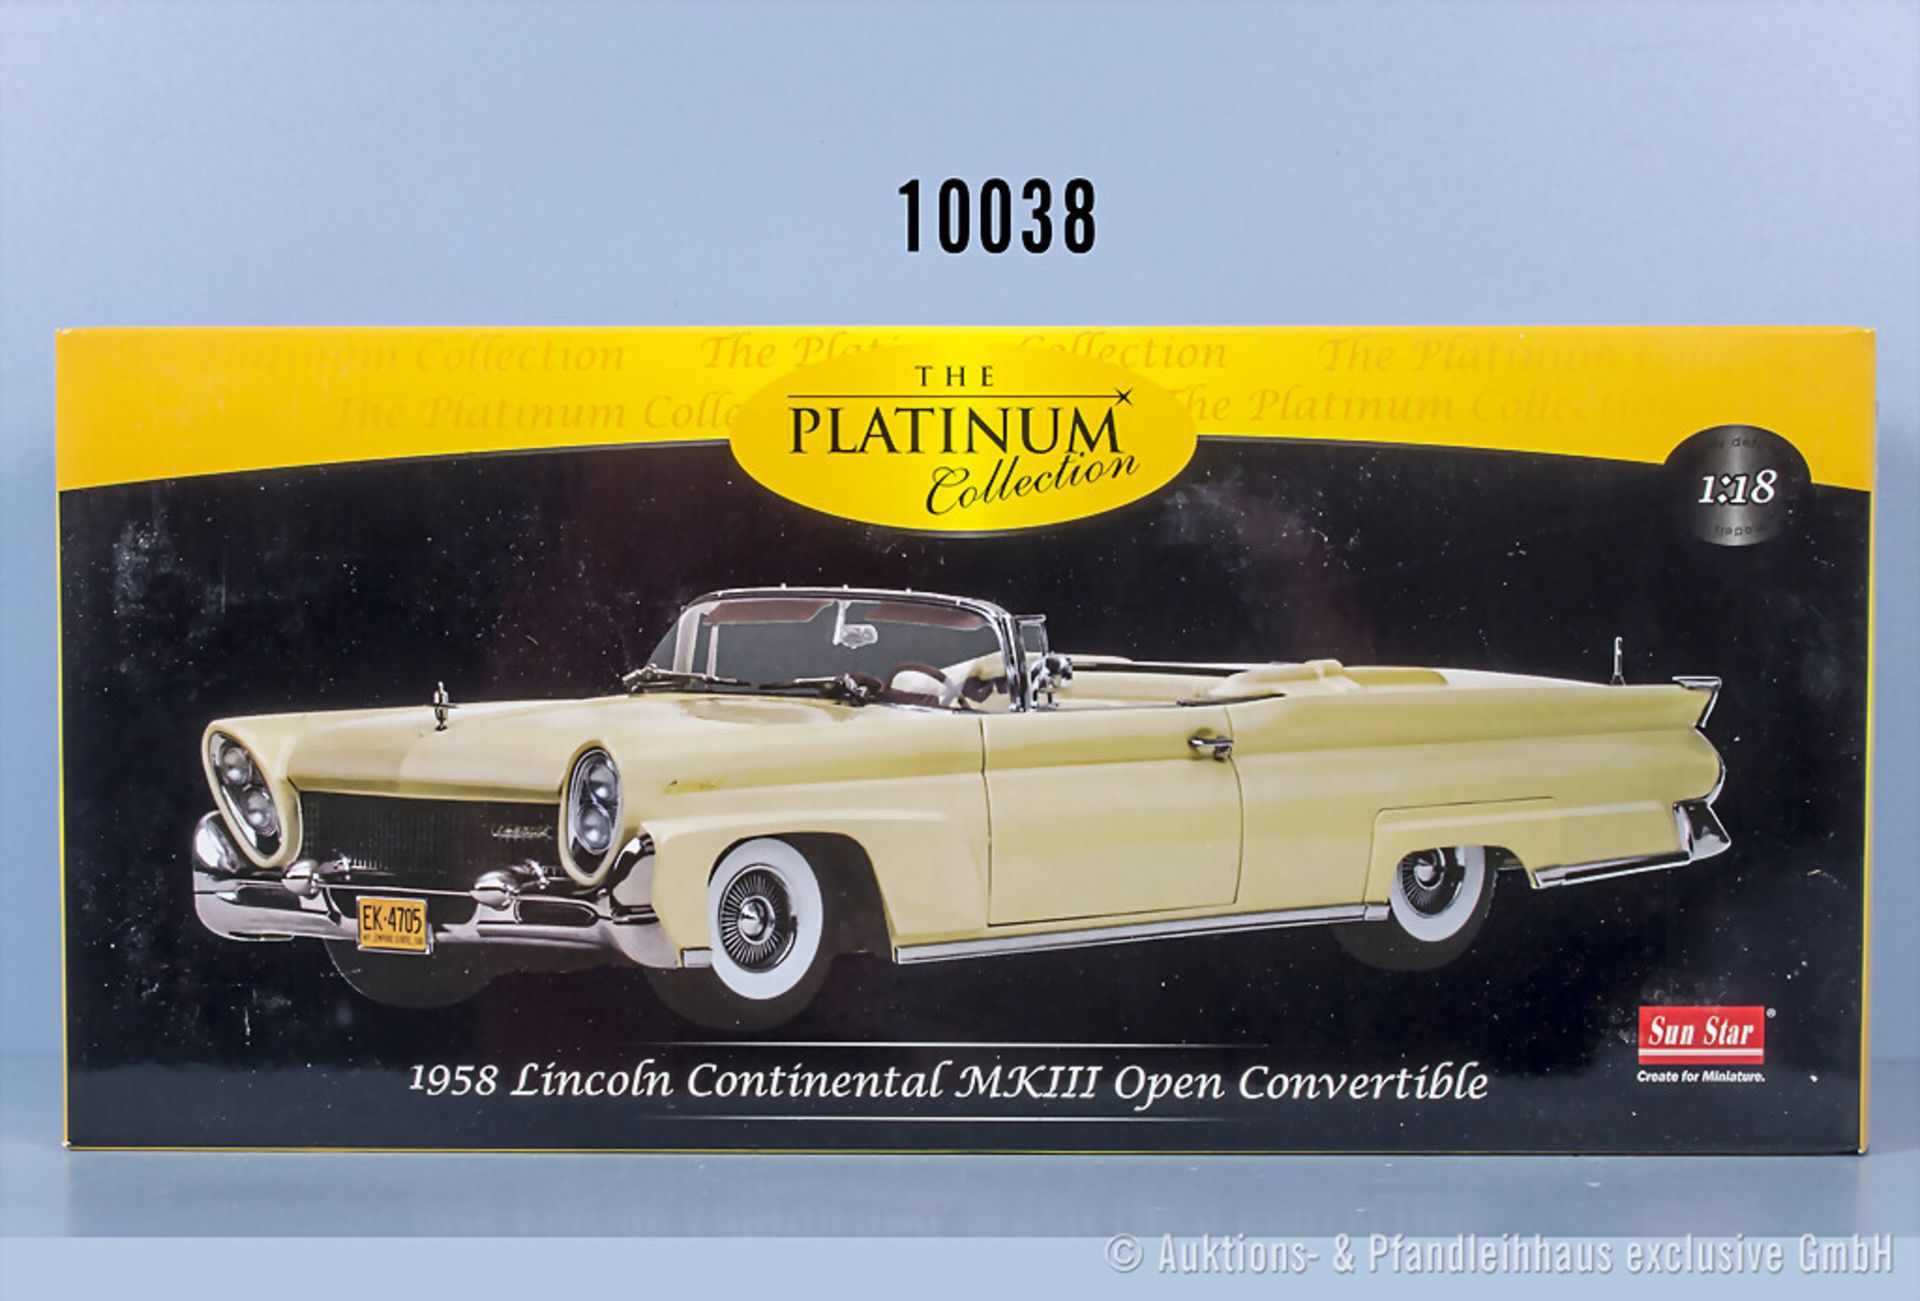 Sun Star The Platinum Collection 1958 Lincoln Continental MKIII Open Convertible, 4705, ...